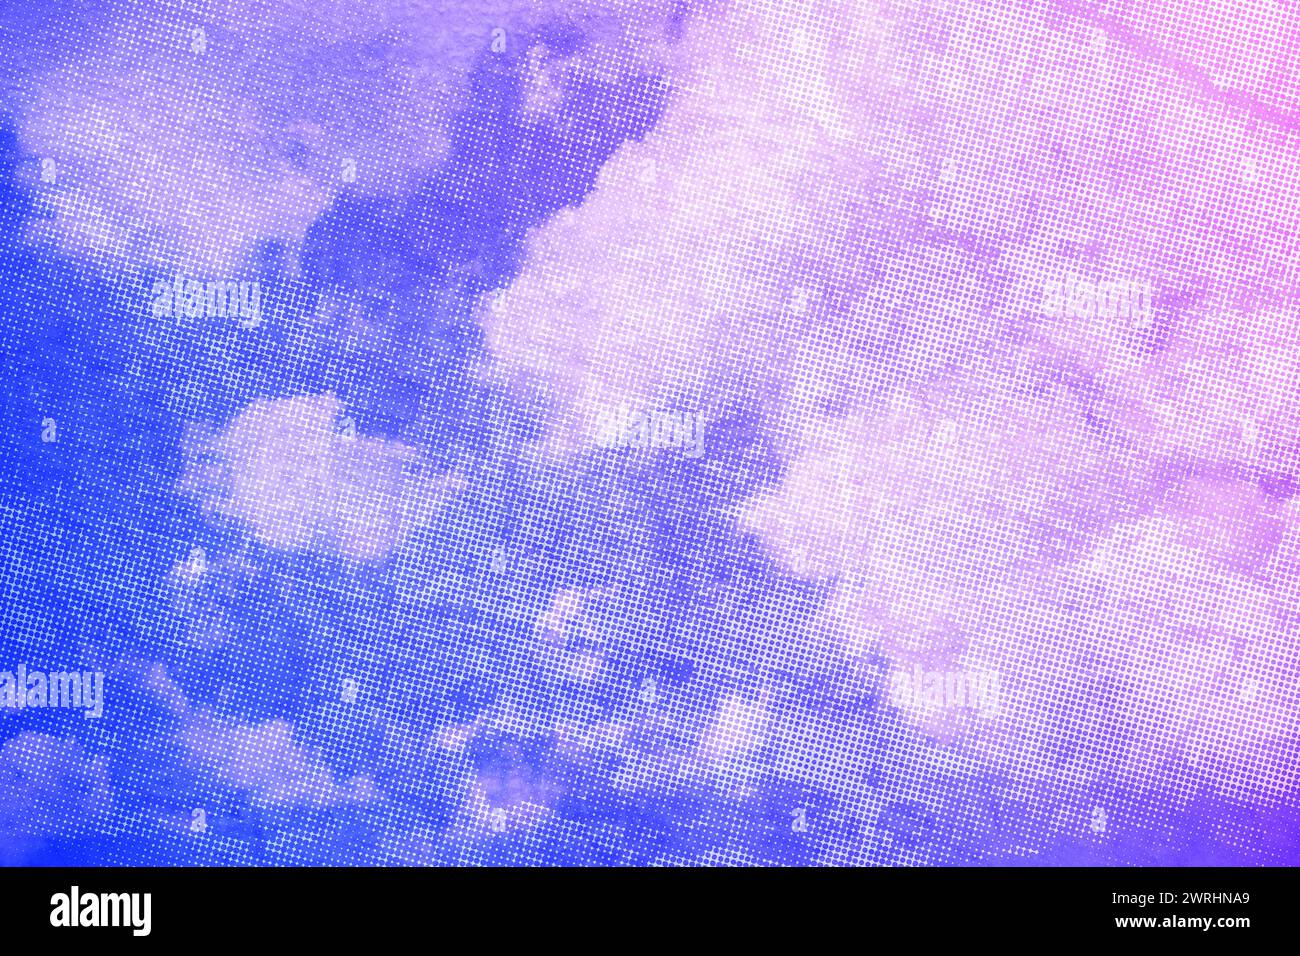 Colorful gardient abstract painting artistic graphic background Stock Photo